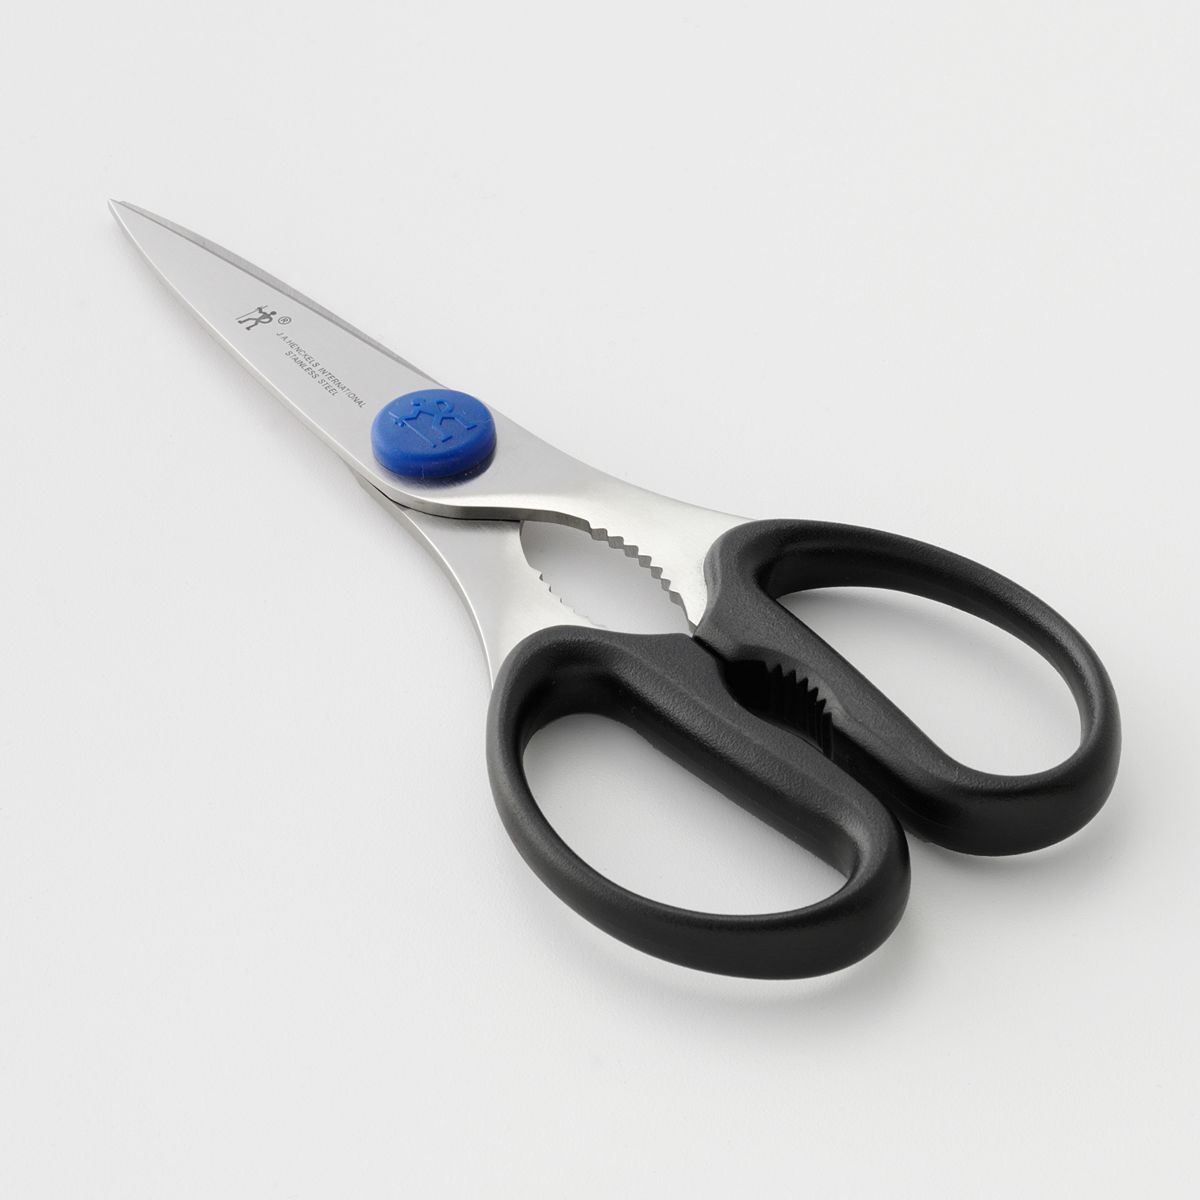 angled view of the take apart kichen shears displayed on a light gray surface